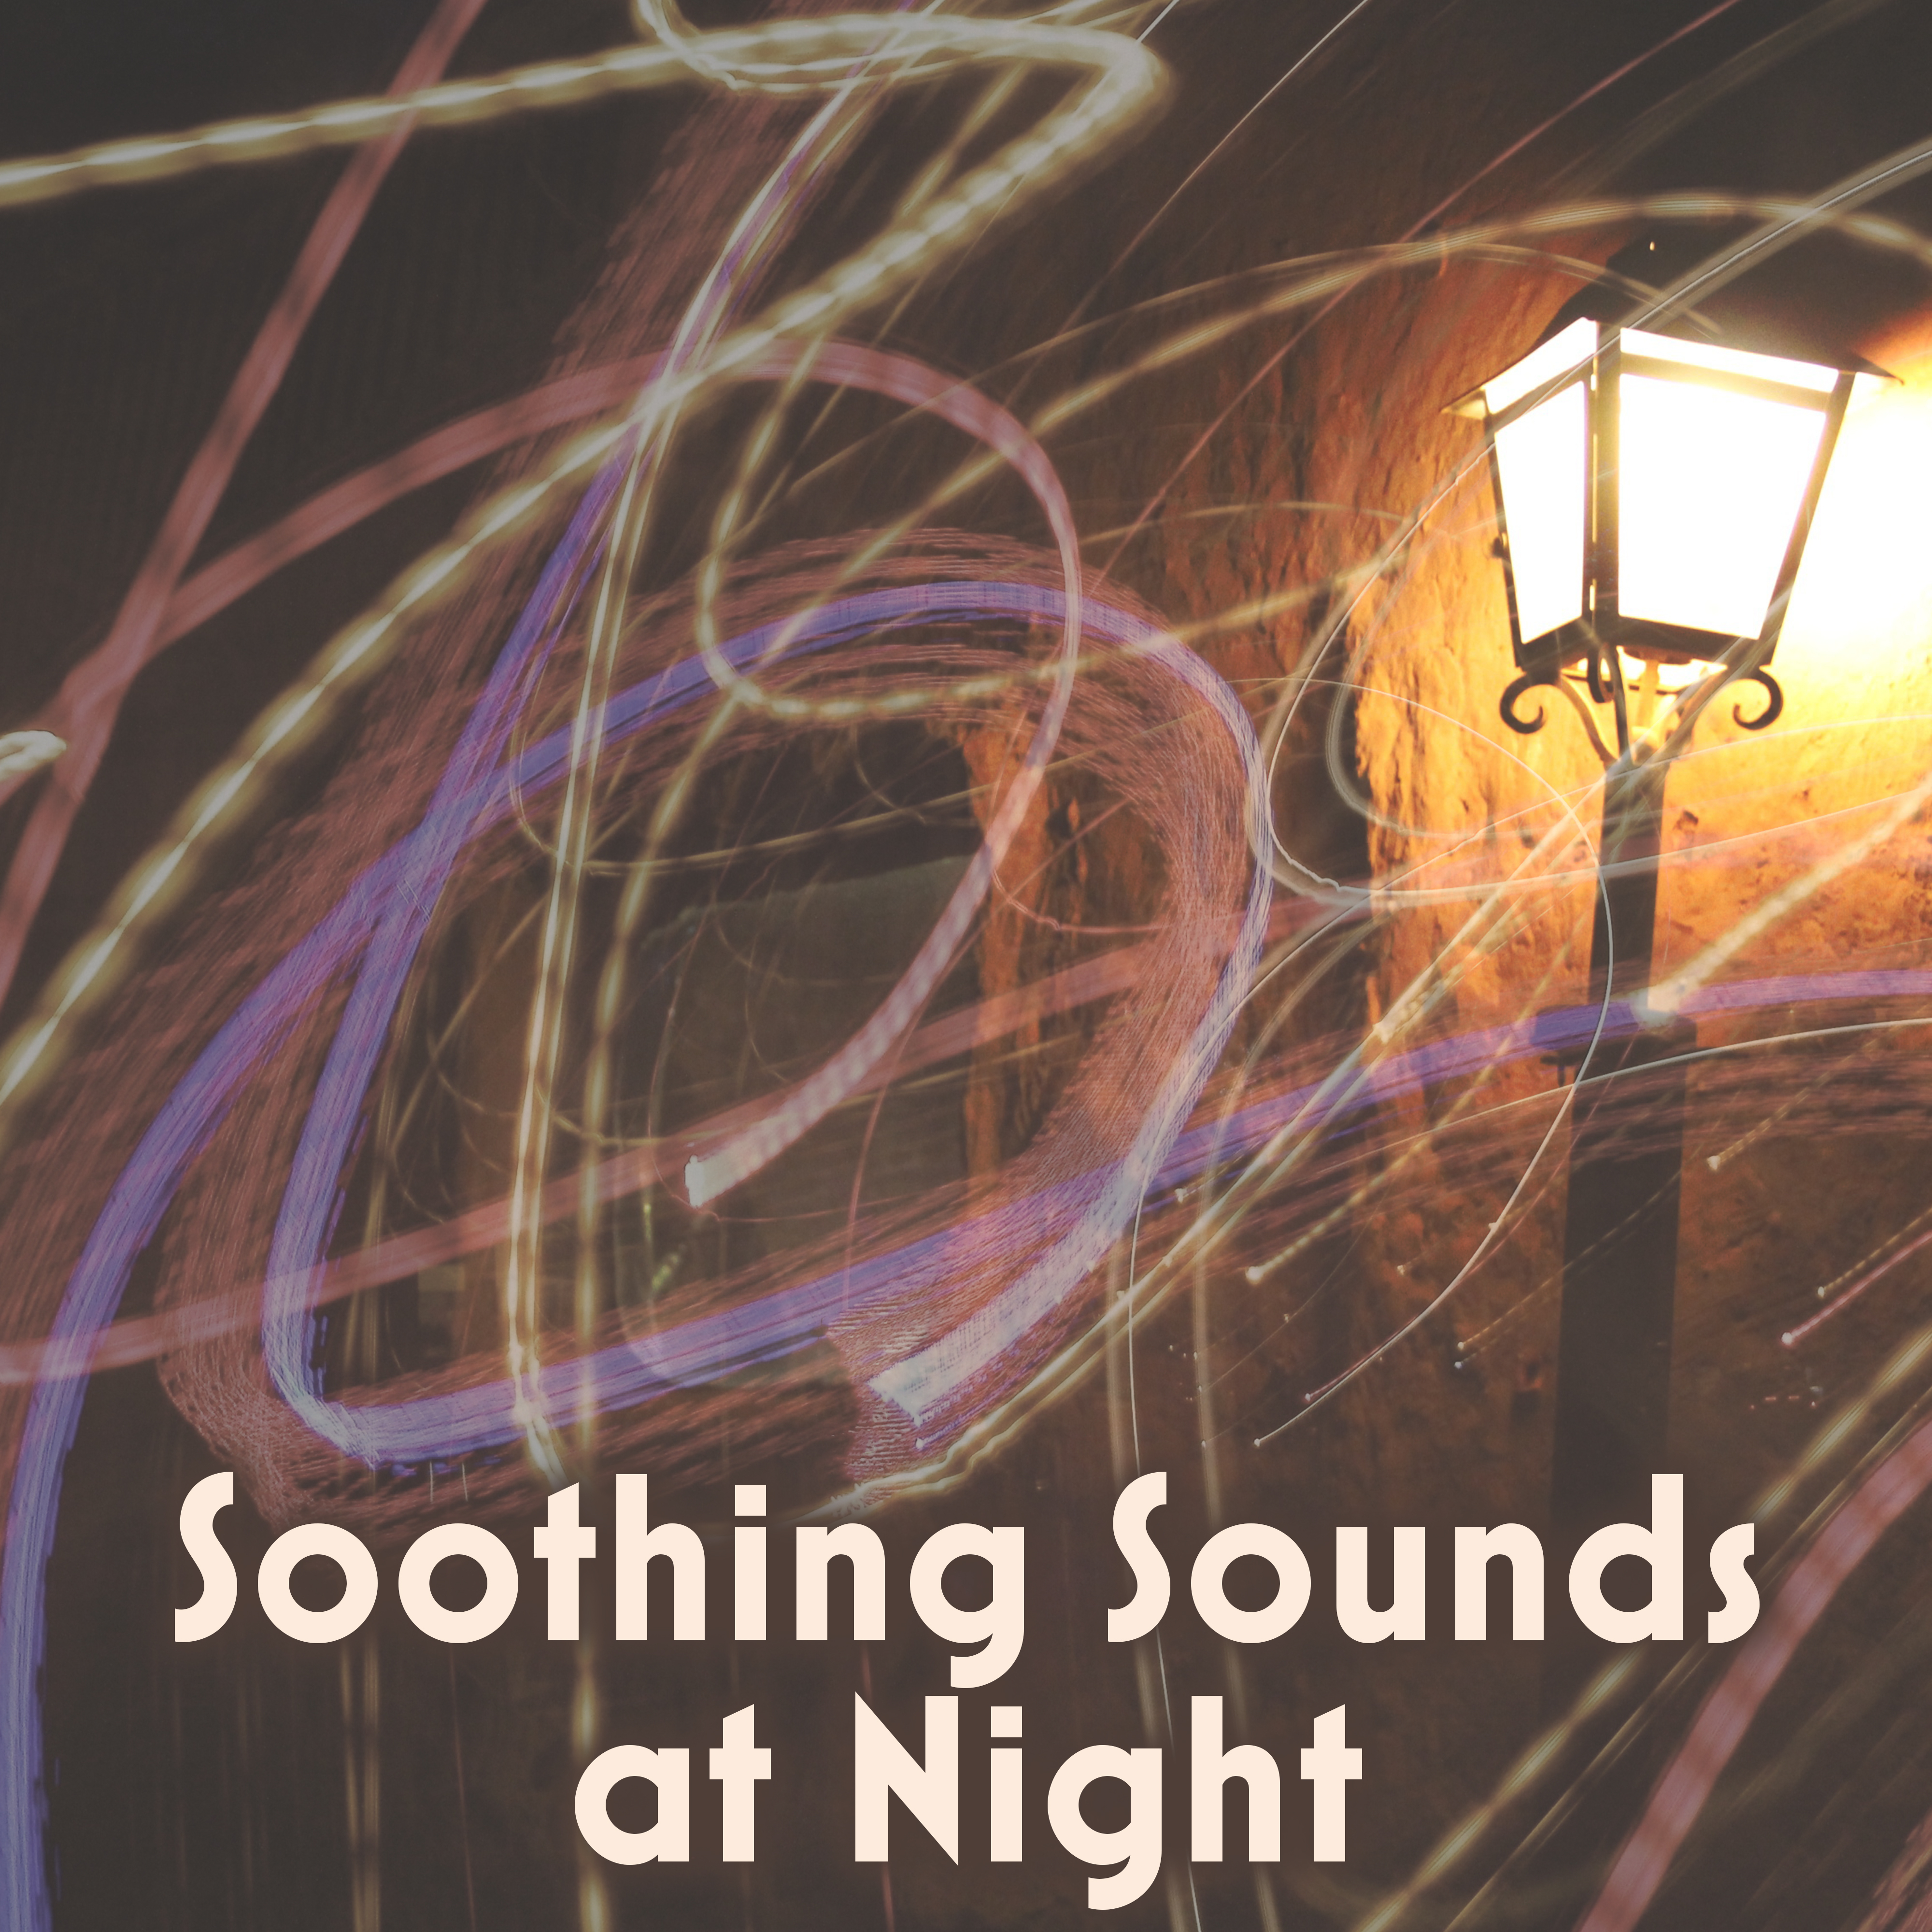 Soothing Sounds at Night – Instrumental Jazz Music, Sensual Jazz, Songs for Two, Calm Night, Deep Relaxation, Smooth Jazz